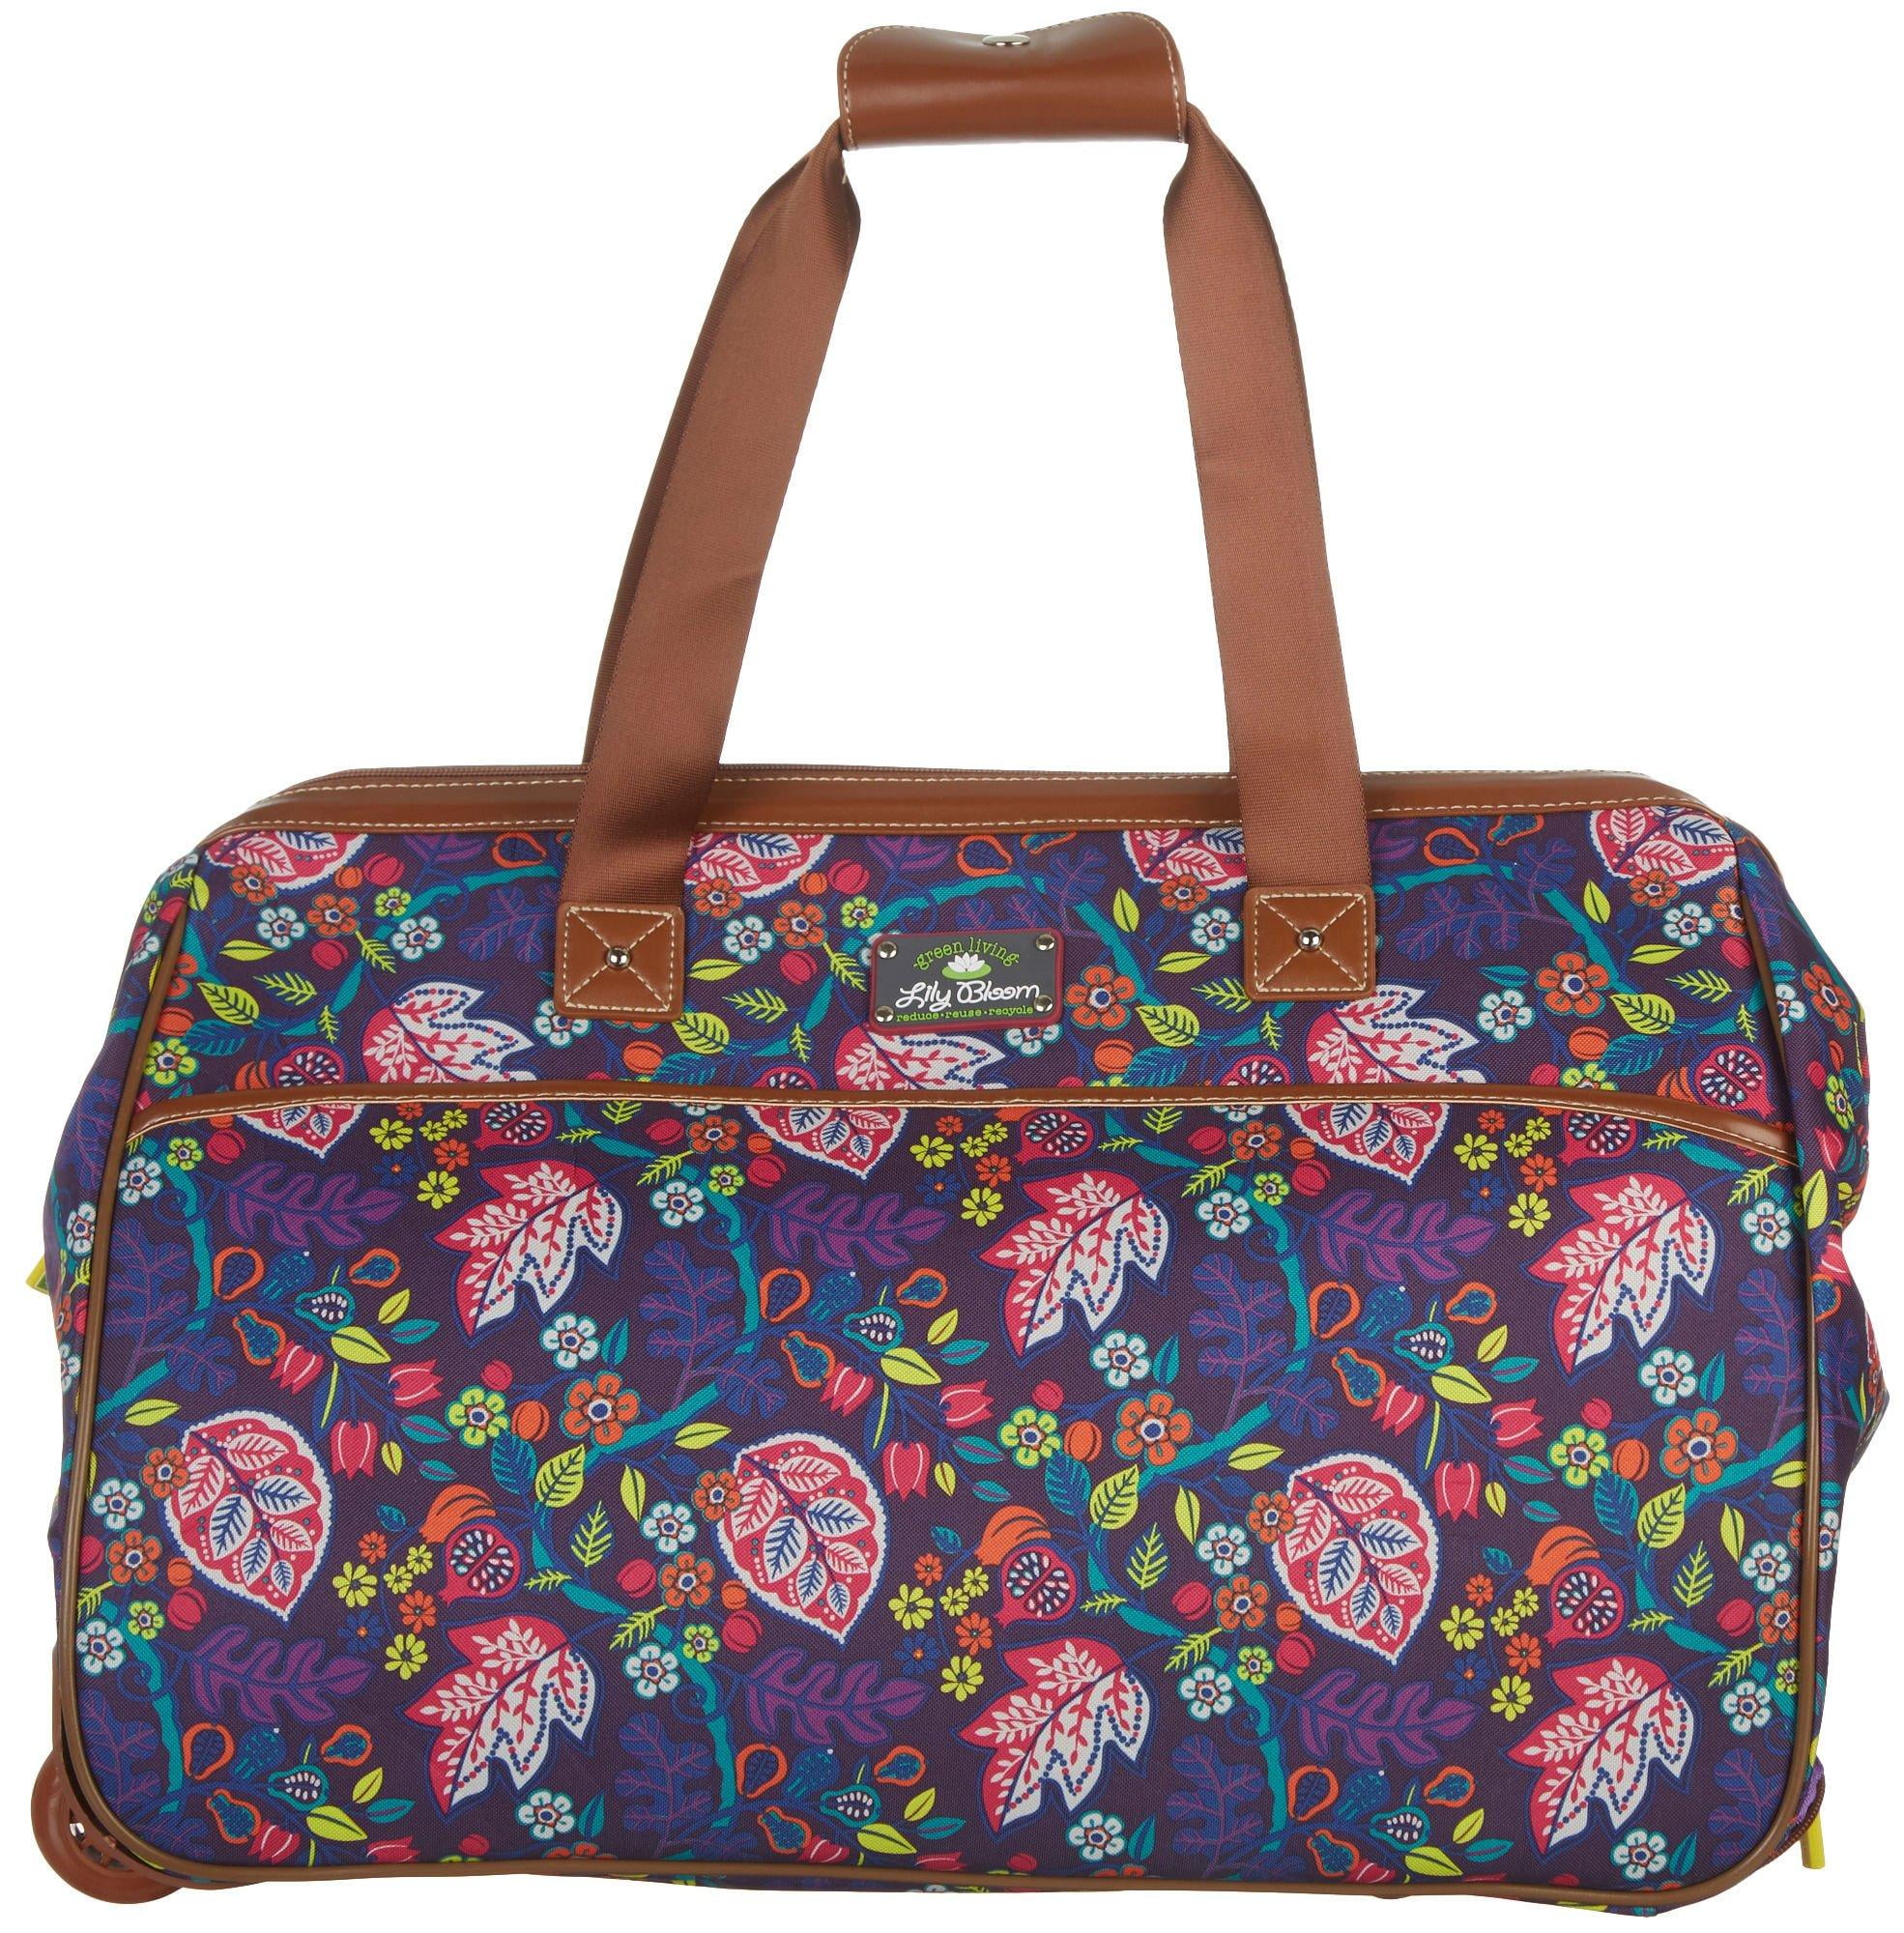 Lily Bloom Luggage Designer Pattern Suitcase Wheeled Duffel Carry On Bag 22in, Raking It In 